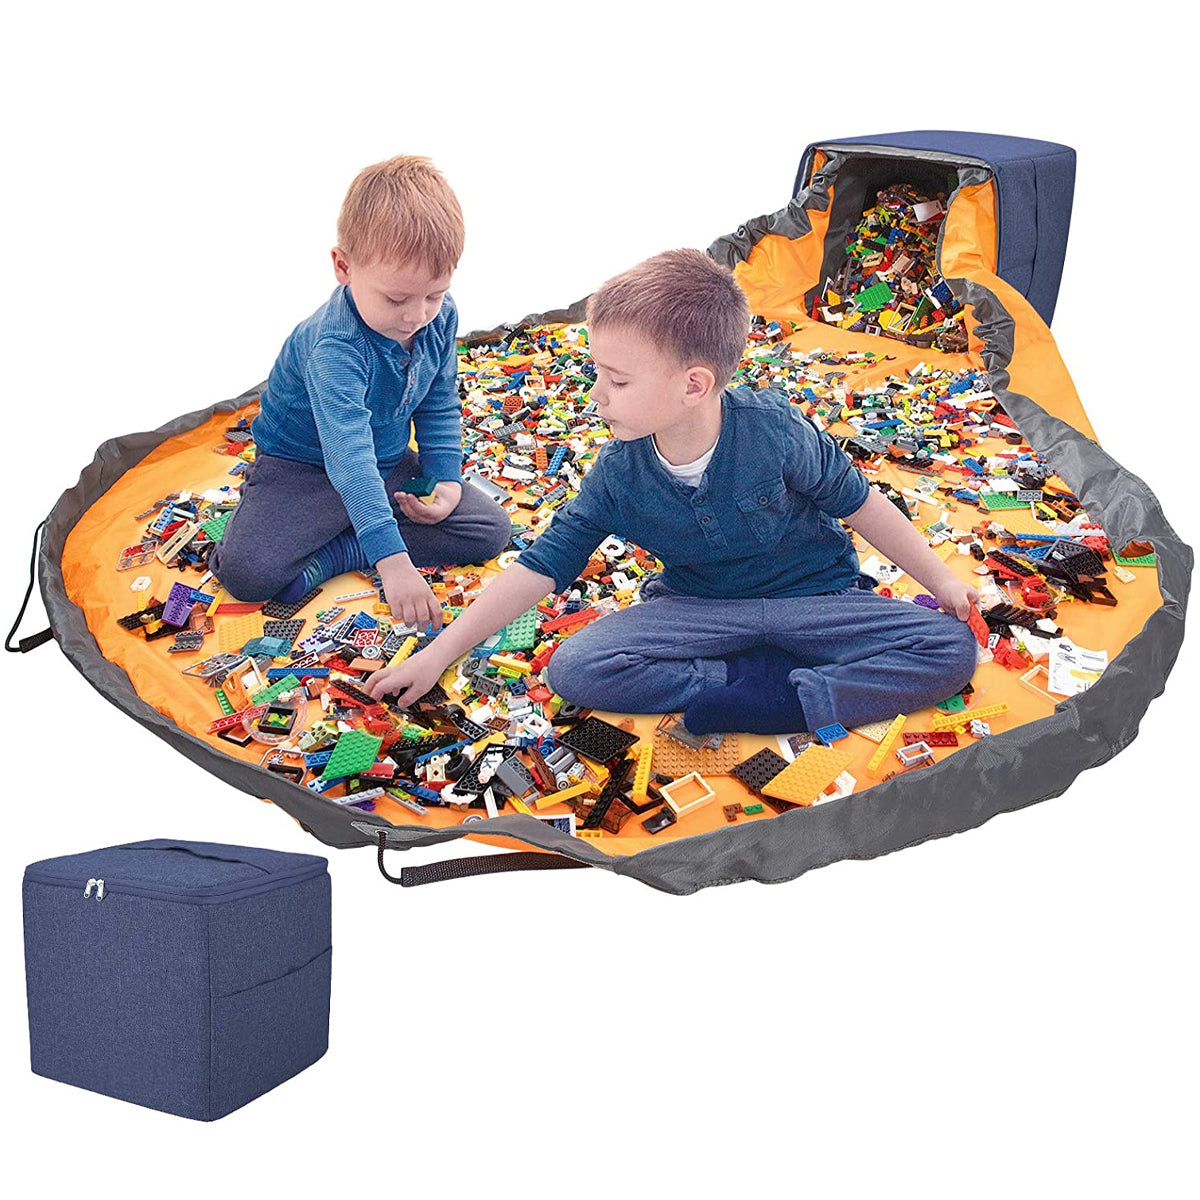 2-In-1 Fun 55” Play Mat & Toy Storage Cube – Instant Cleanup!